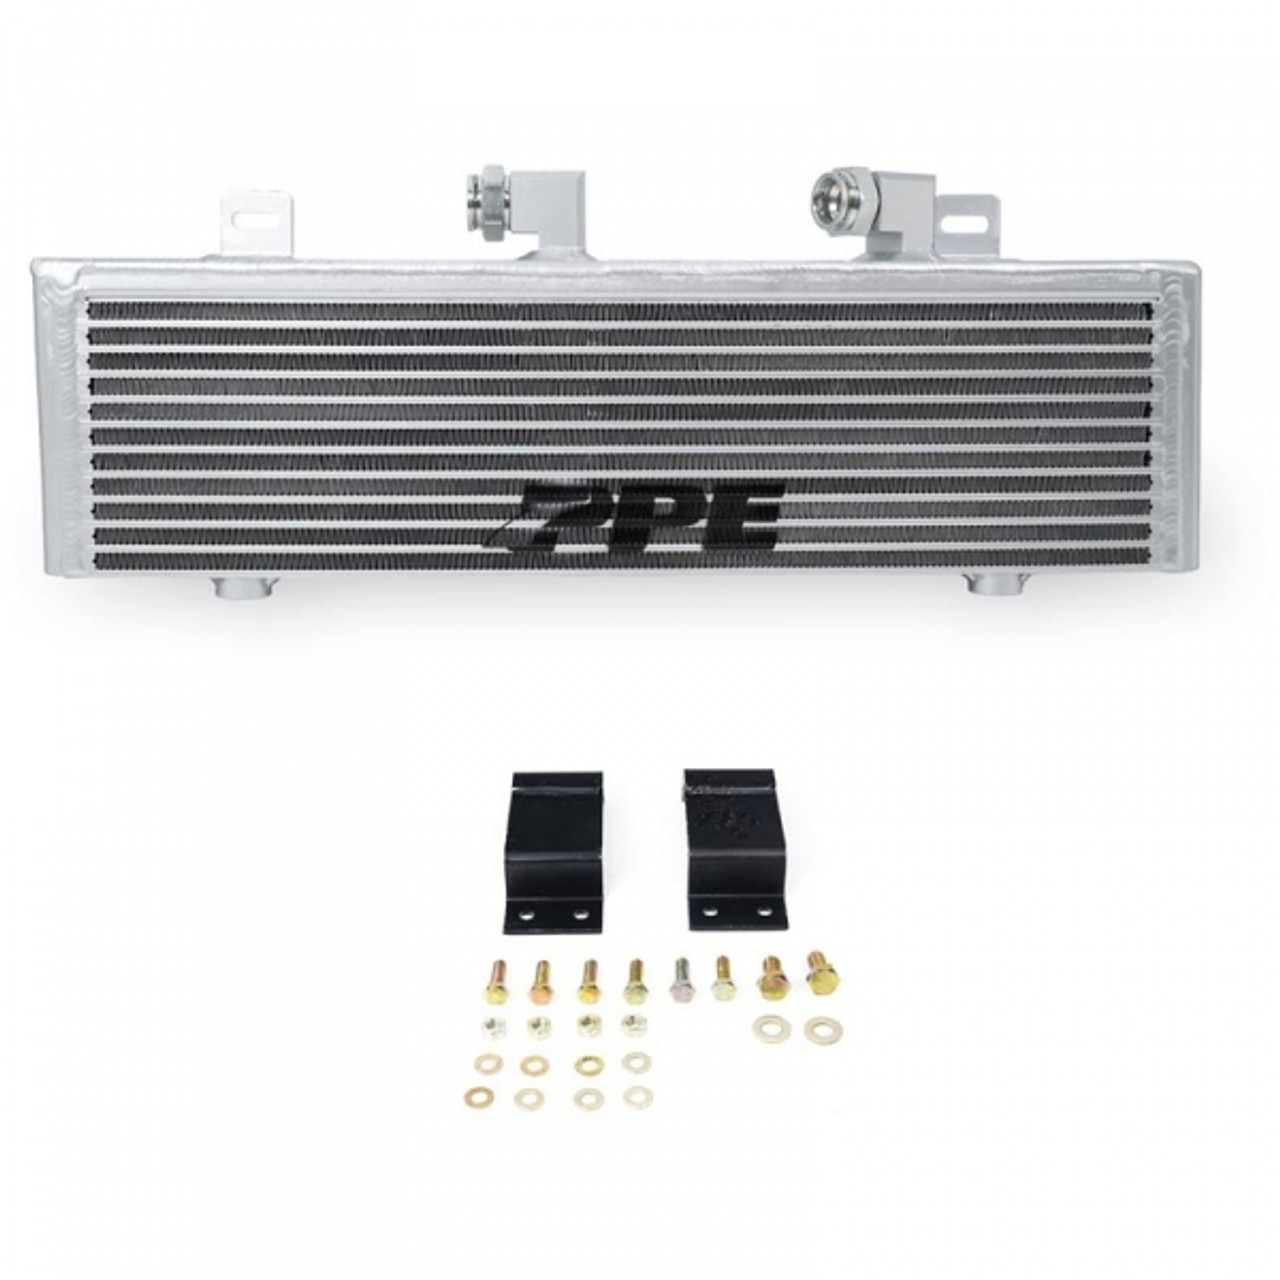 PPE BAR & PLATE PERFORMANCE TRANSMISSION COOLER 2017-2019 GM 6.6L DURAMAX (PPE124065000)Complete View